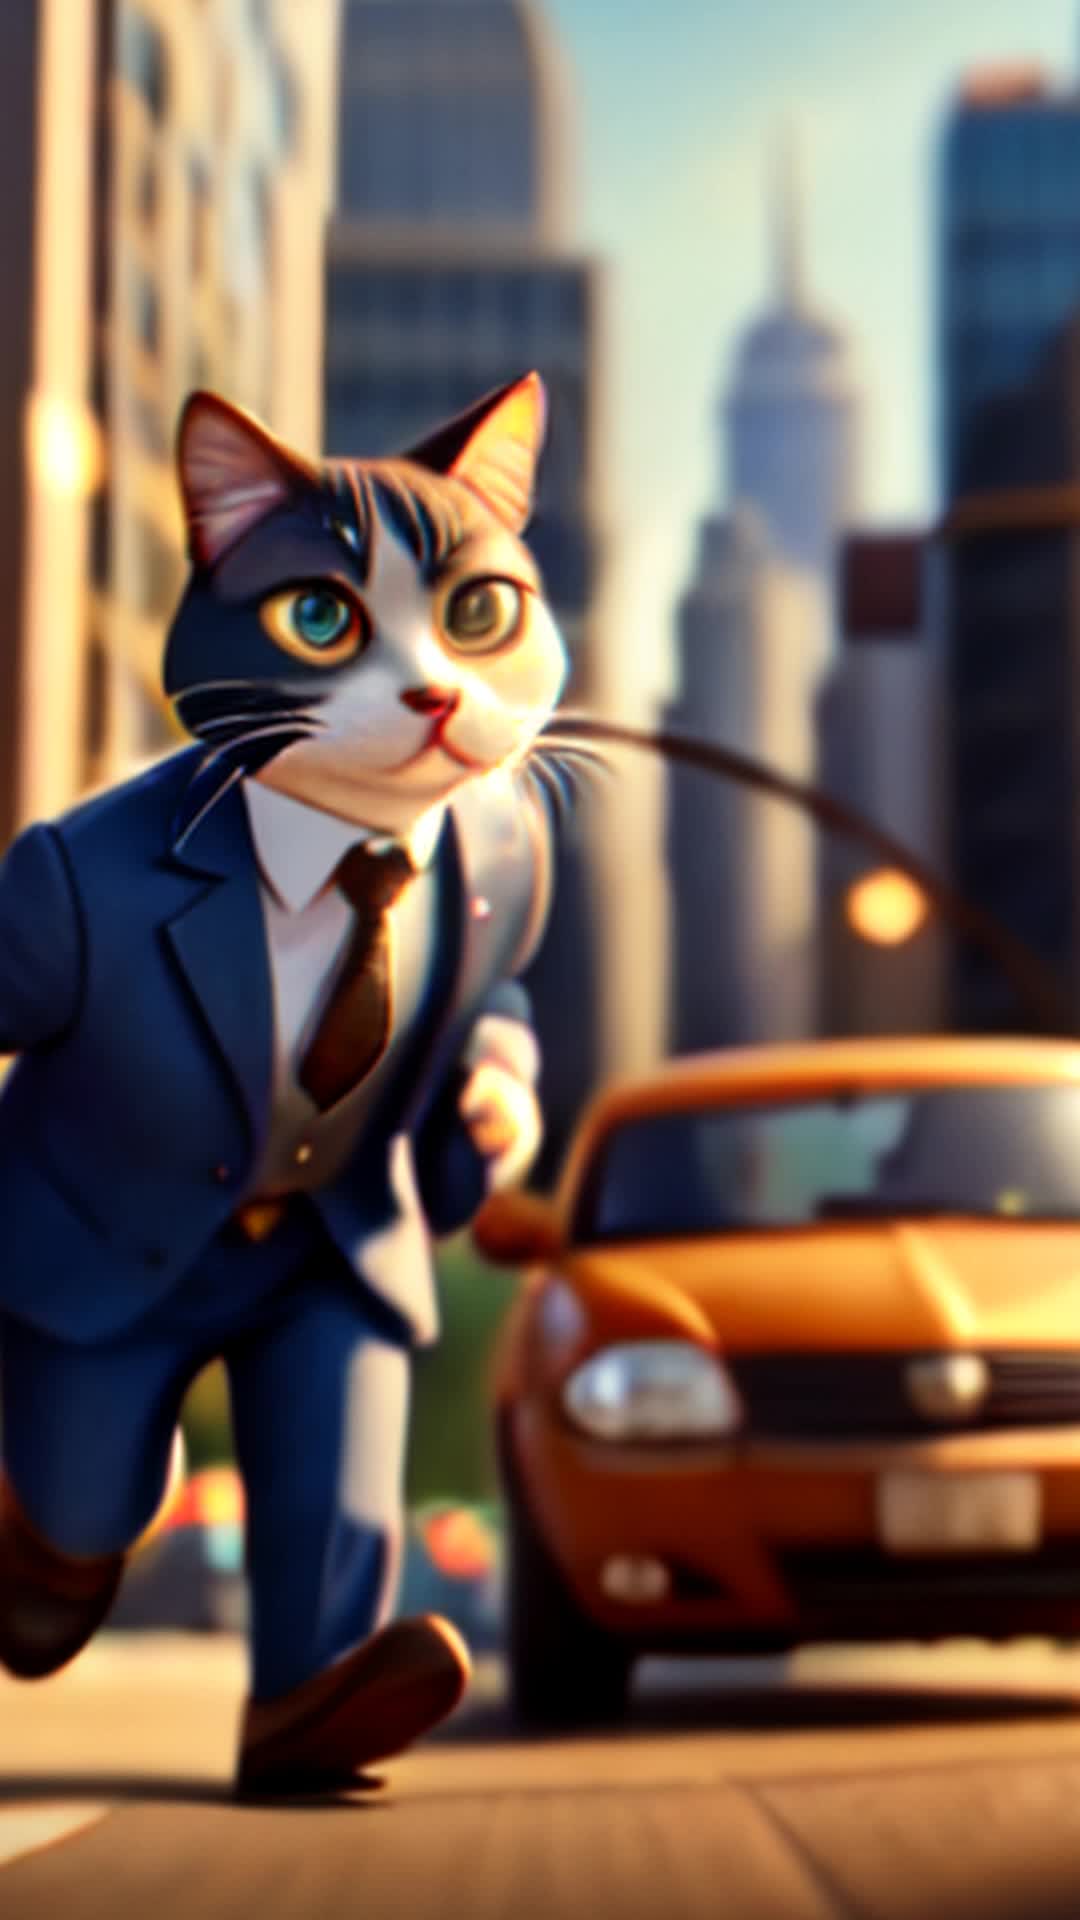 bustling city background, cat in tailored suit, darting through crowded streets, towering office buildings in background, highly detailed, dynamic motion blur, wide-angle shot